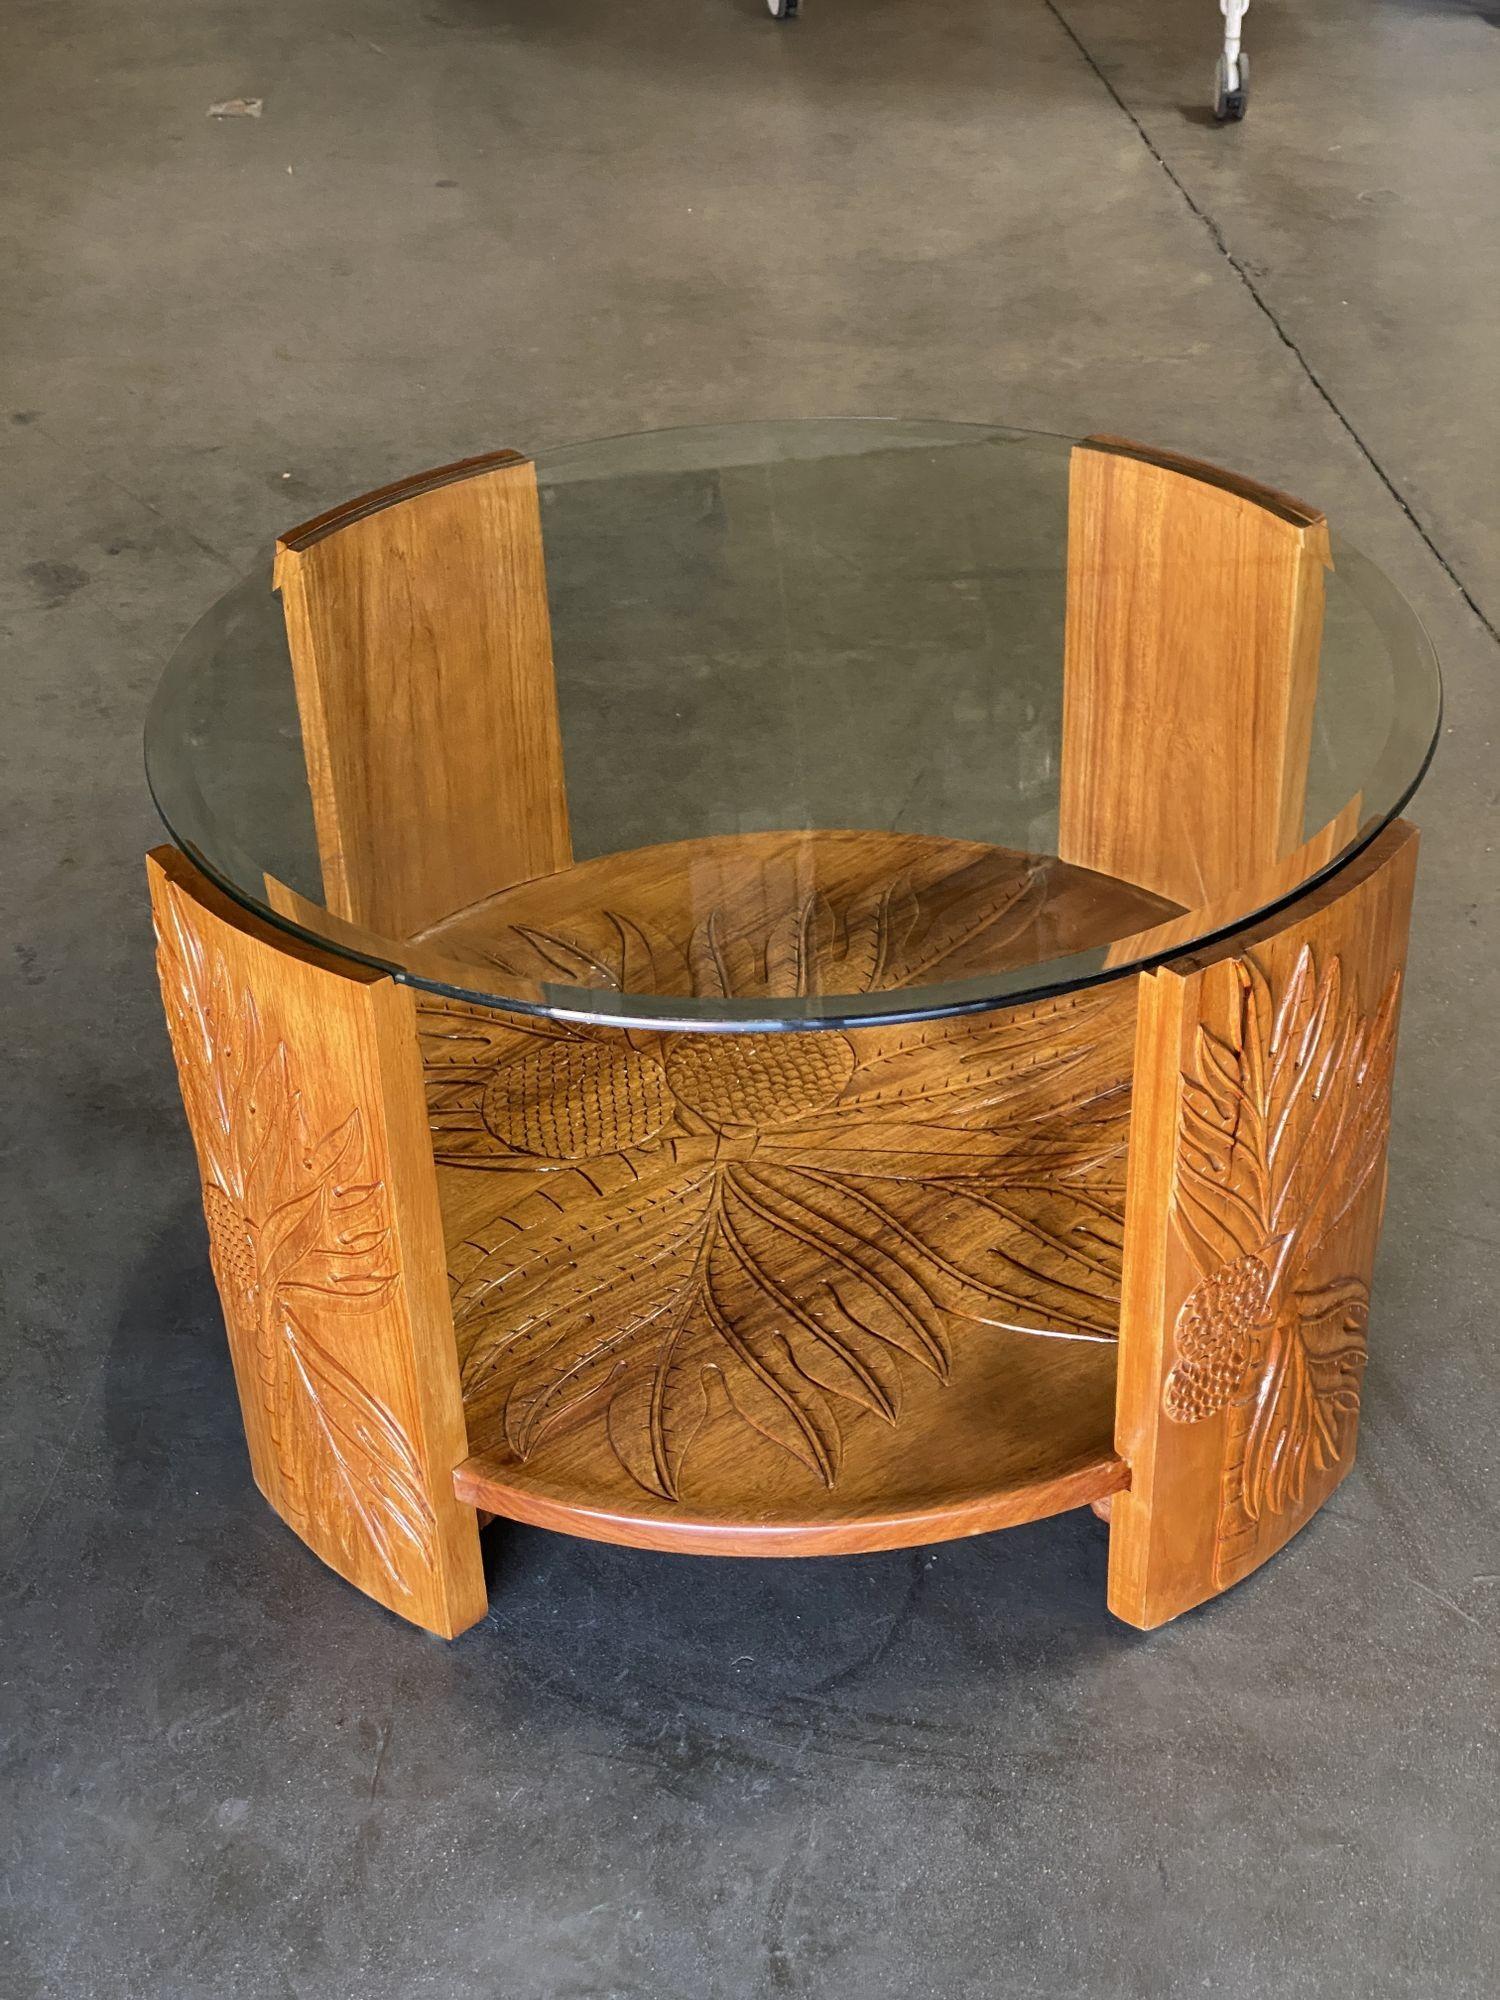 Rosewood Restored Midcentury Hand Carved Palm Pattern Koa Wood Coffee Table w/ Glass Top